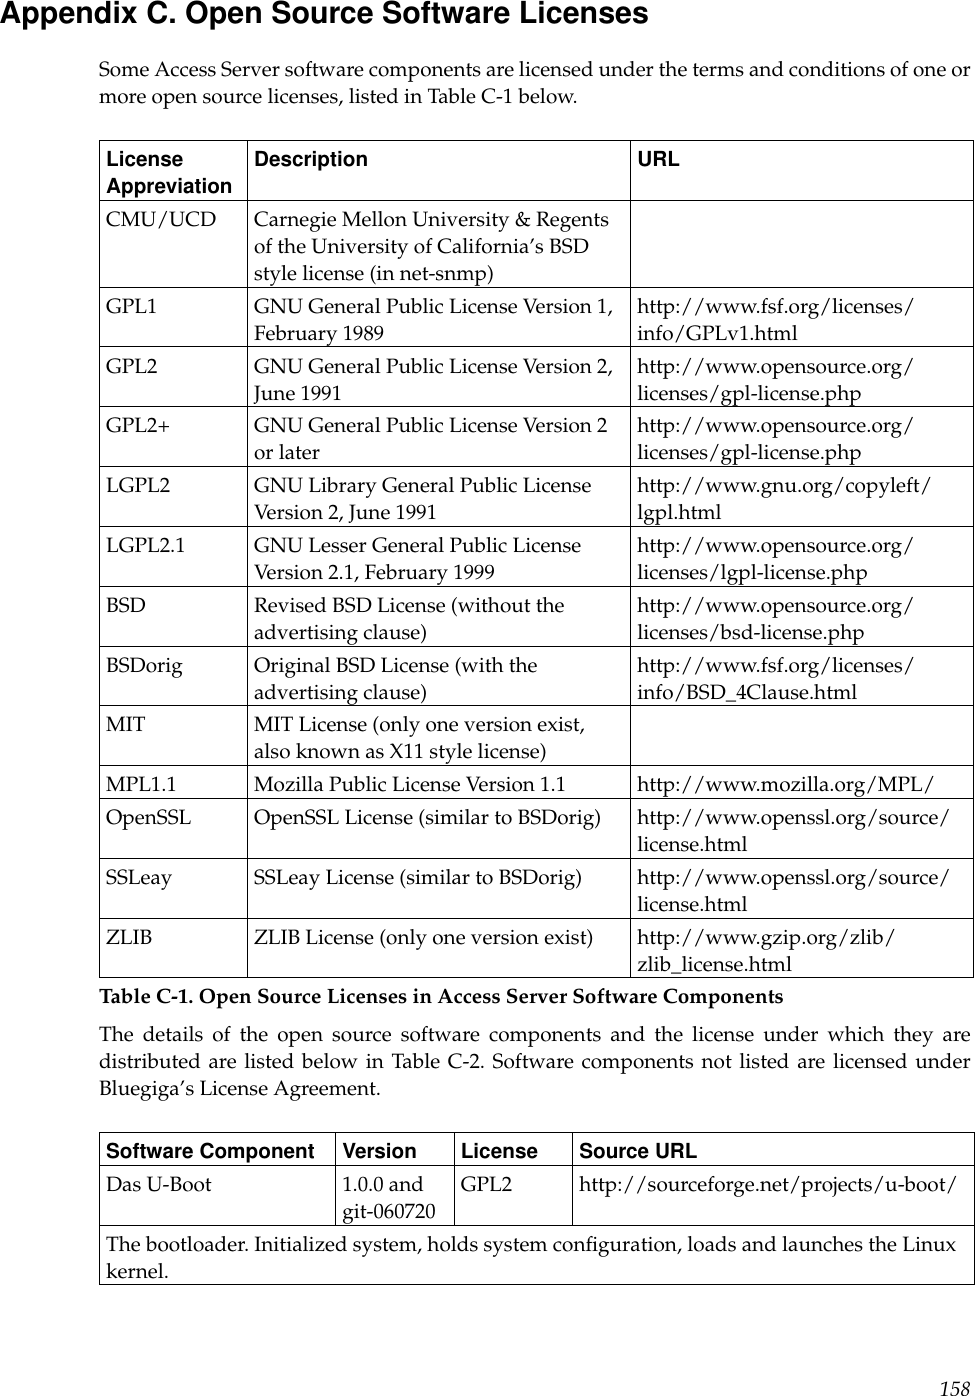 Appendix C. Open Source Software LicensesSome Access Server software components are licensed under the terms and conditions of one ormore open source licenses, listed in Table C-1 below.LicenseAppreviationDescription URLCMU/UCD Carnegie Mellon University &amp; Regentsof the University of California’s BSDstyle license (in net-snmp)GPL1 GNU General Public License Version 1,February 1989http://www.fsf.org/licenses/info/GPLv1.htmlGPL2 GNU General Public License Version 2,June 1991http://www.opensource.org/licenses/gpl-license.phpGPL2+ GNU General Public License Version 2or laterhttp://www.opensource.org/licenses/gpl-license.phpLGPL2 GNU Library General Public LicenseVersion 2, June 1991http://www.gnu.org/copyleft/lgpl.htmlLGPL2.1 GNU Lesser General Public LicenseVersion 2.1, February 1999http://www.opensource.org/licenses/lgpl-license.phpBSD Revised BSD License (without theadvertising clause)http://www.opensource.org/licenses/bsd-license.phpBSDorig Original BSD License (with theadvertising clause)http://www.fsf.org/licenses/info/BSD_4Clause.htmlMIT MIT License (only one version exist,also known as X11 style license)MPL1.1 Mozilla Public License Version 1.1 http://www.mozilla.org/MPL/OpenSSL OpenSSL License (similar to BSDorig) http://www.openssl.org/source/license.htmlSSLeay SSLeay License (similar to BSDorig) http://www.openssl.org/source/license.htmlZLIB ZLIB License (only one version exist) http://www.gzip.org/zlib/zlib_license.htmlTable C-1. Open Source Licenses in Access Server Software ComponentsThe details of the open source software components and the license under which they aredistributed are listed below in Table C-2. Software components not listed are licensed underBluegiga’s License Agreement.Software Component Version License Source URLDas U-Boot 1.0.0 andgit-060720GPL2 http://sourceforge.net/projects/u-boot/The bootloader. Initialized system, holds system conﬁguration, loads and launches the Linuxkernel.158